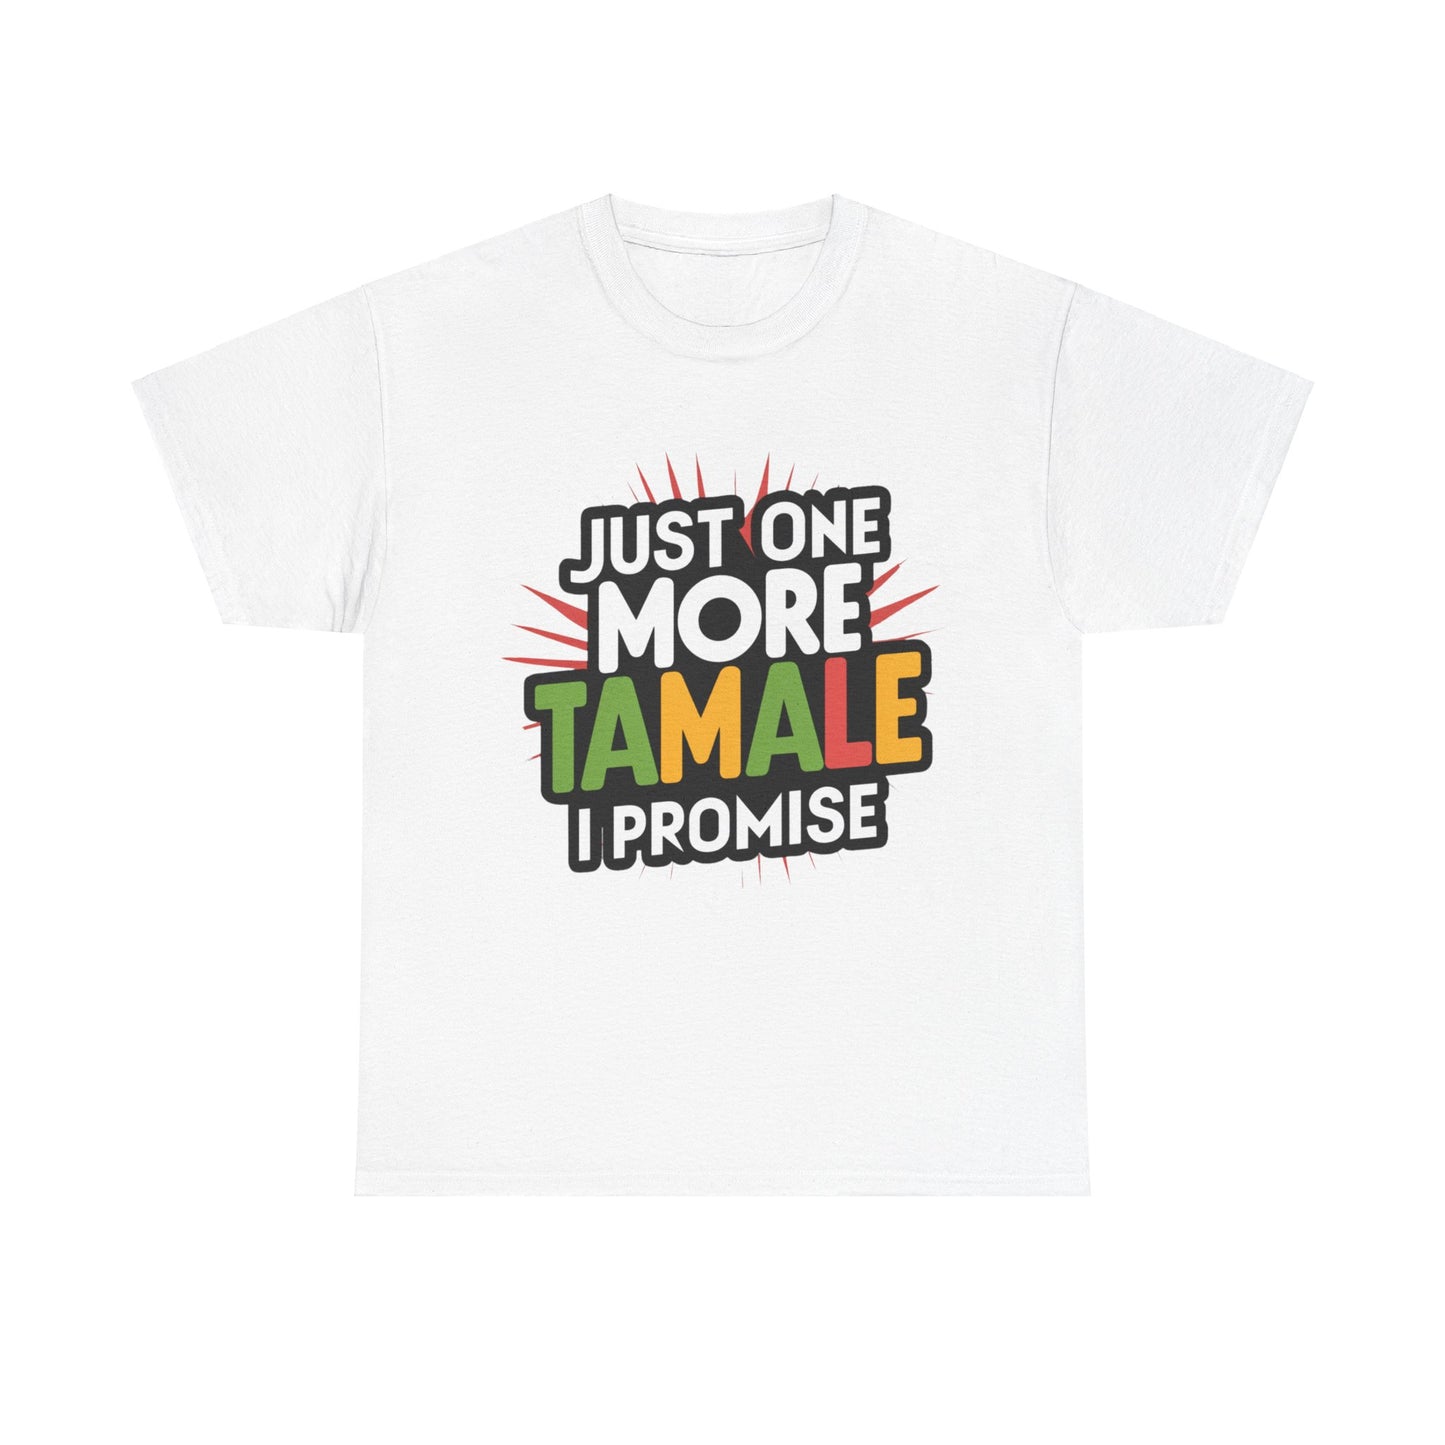 Just One More Tamale I Promise Mexican Food Graphic Unisex Heavy Cotton Tee Cotton Funny Humorous Graphic Soft Premium Unisex Men Women White T-shirt Birthday Gift-10